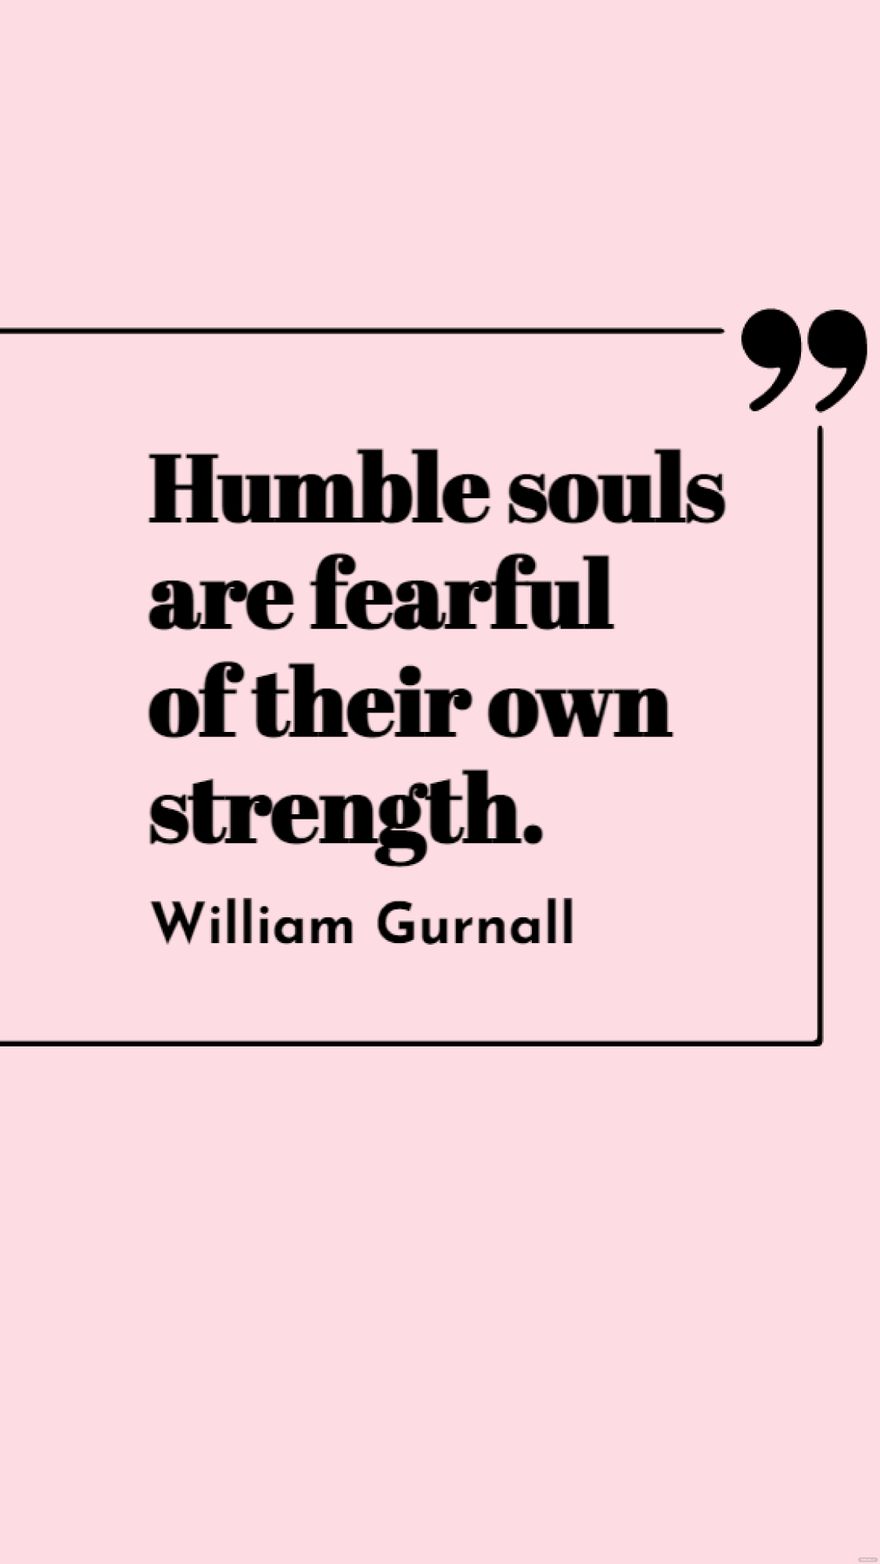 William Gurnall - Humble souls are fearful of their own strength. in JPG